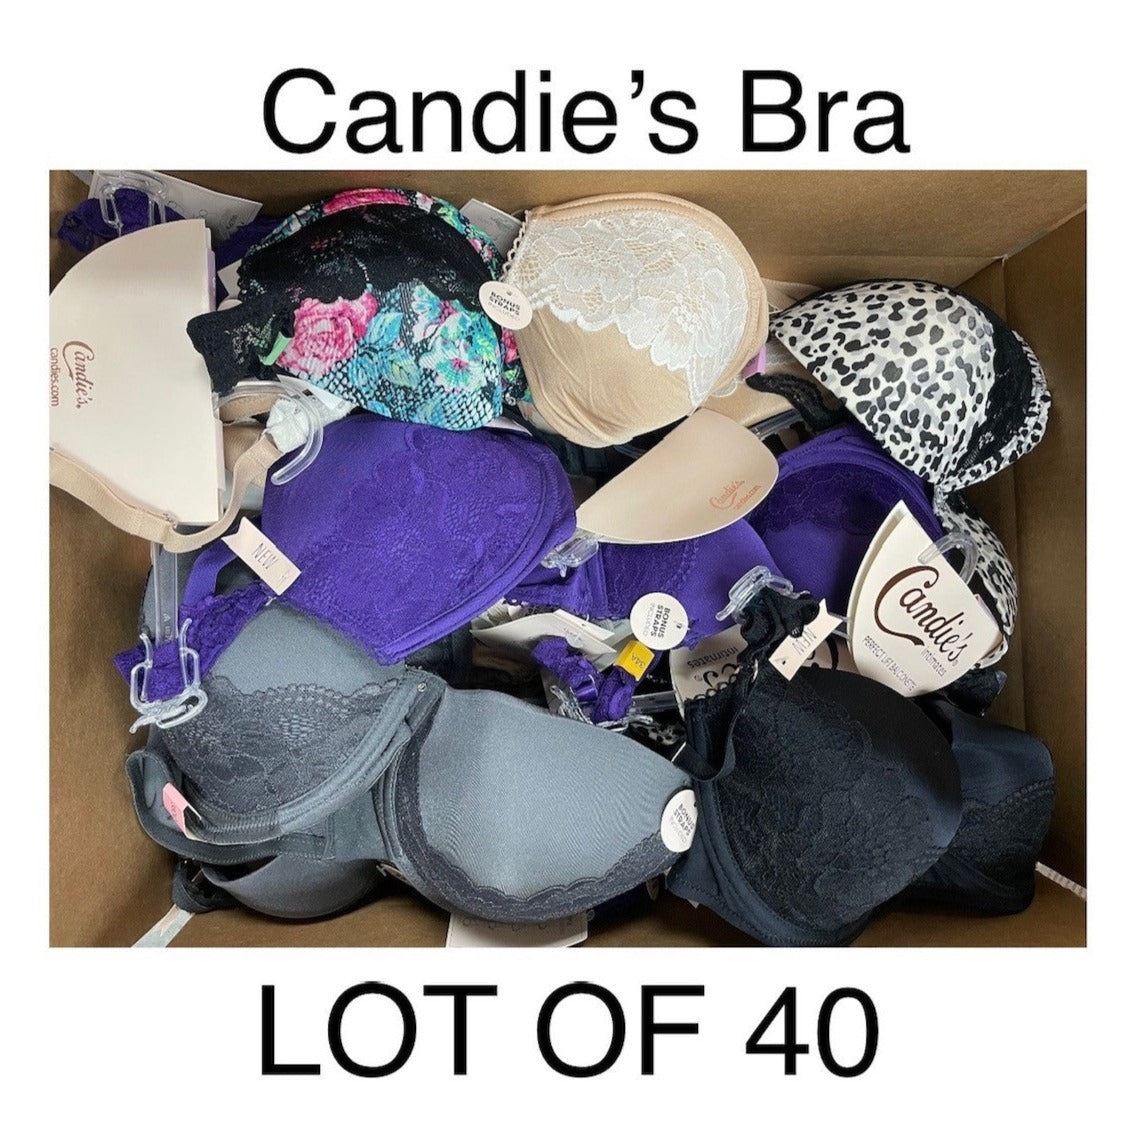 Lot Of 40 Candie's Padded Underwire Support Push Up Bra, Assorted Sizes & Colors overstock, surplus, wholesale lot, underwear, liquidations